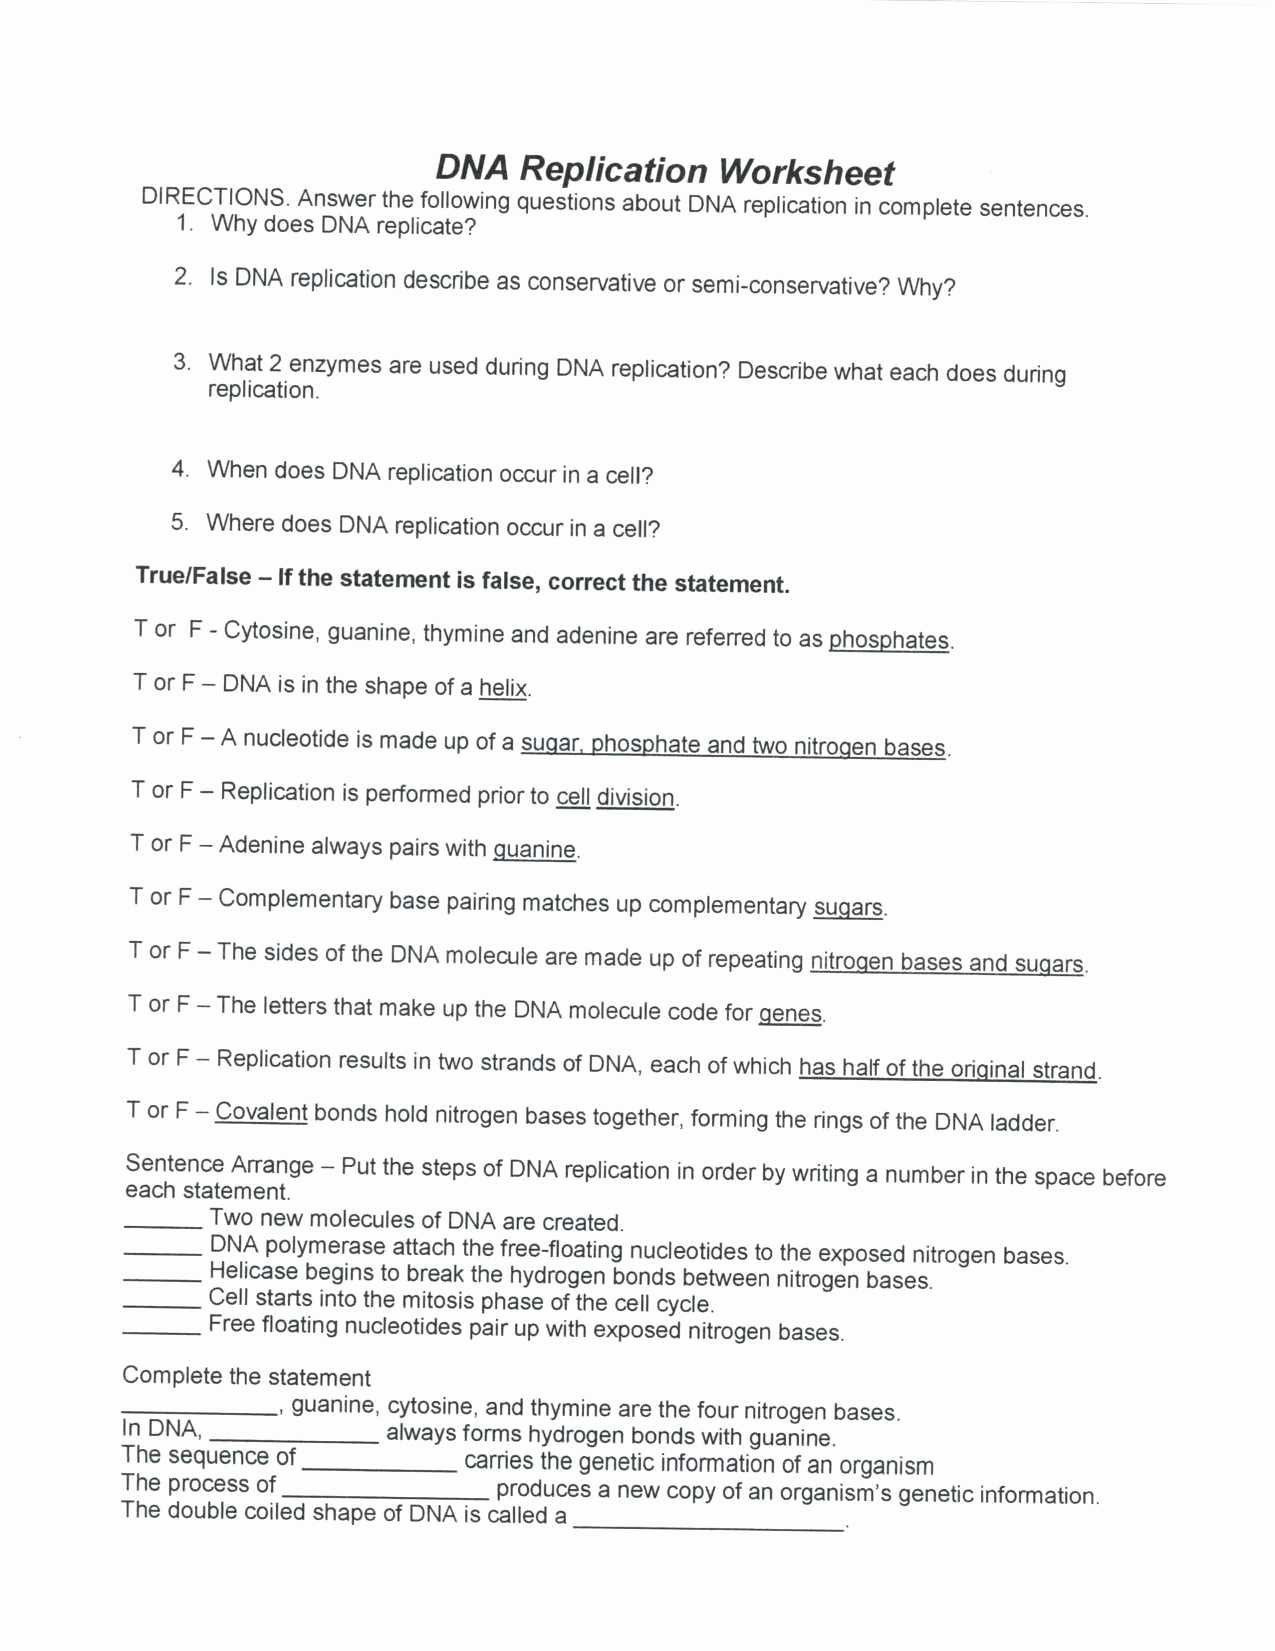 dna-the-double-helix-coloring-worksheet-answers-db-excel